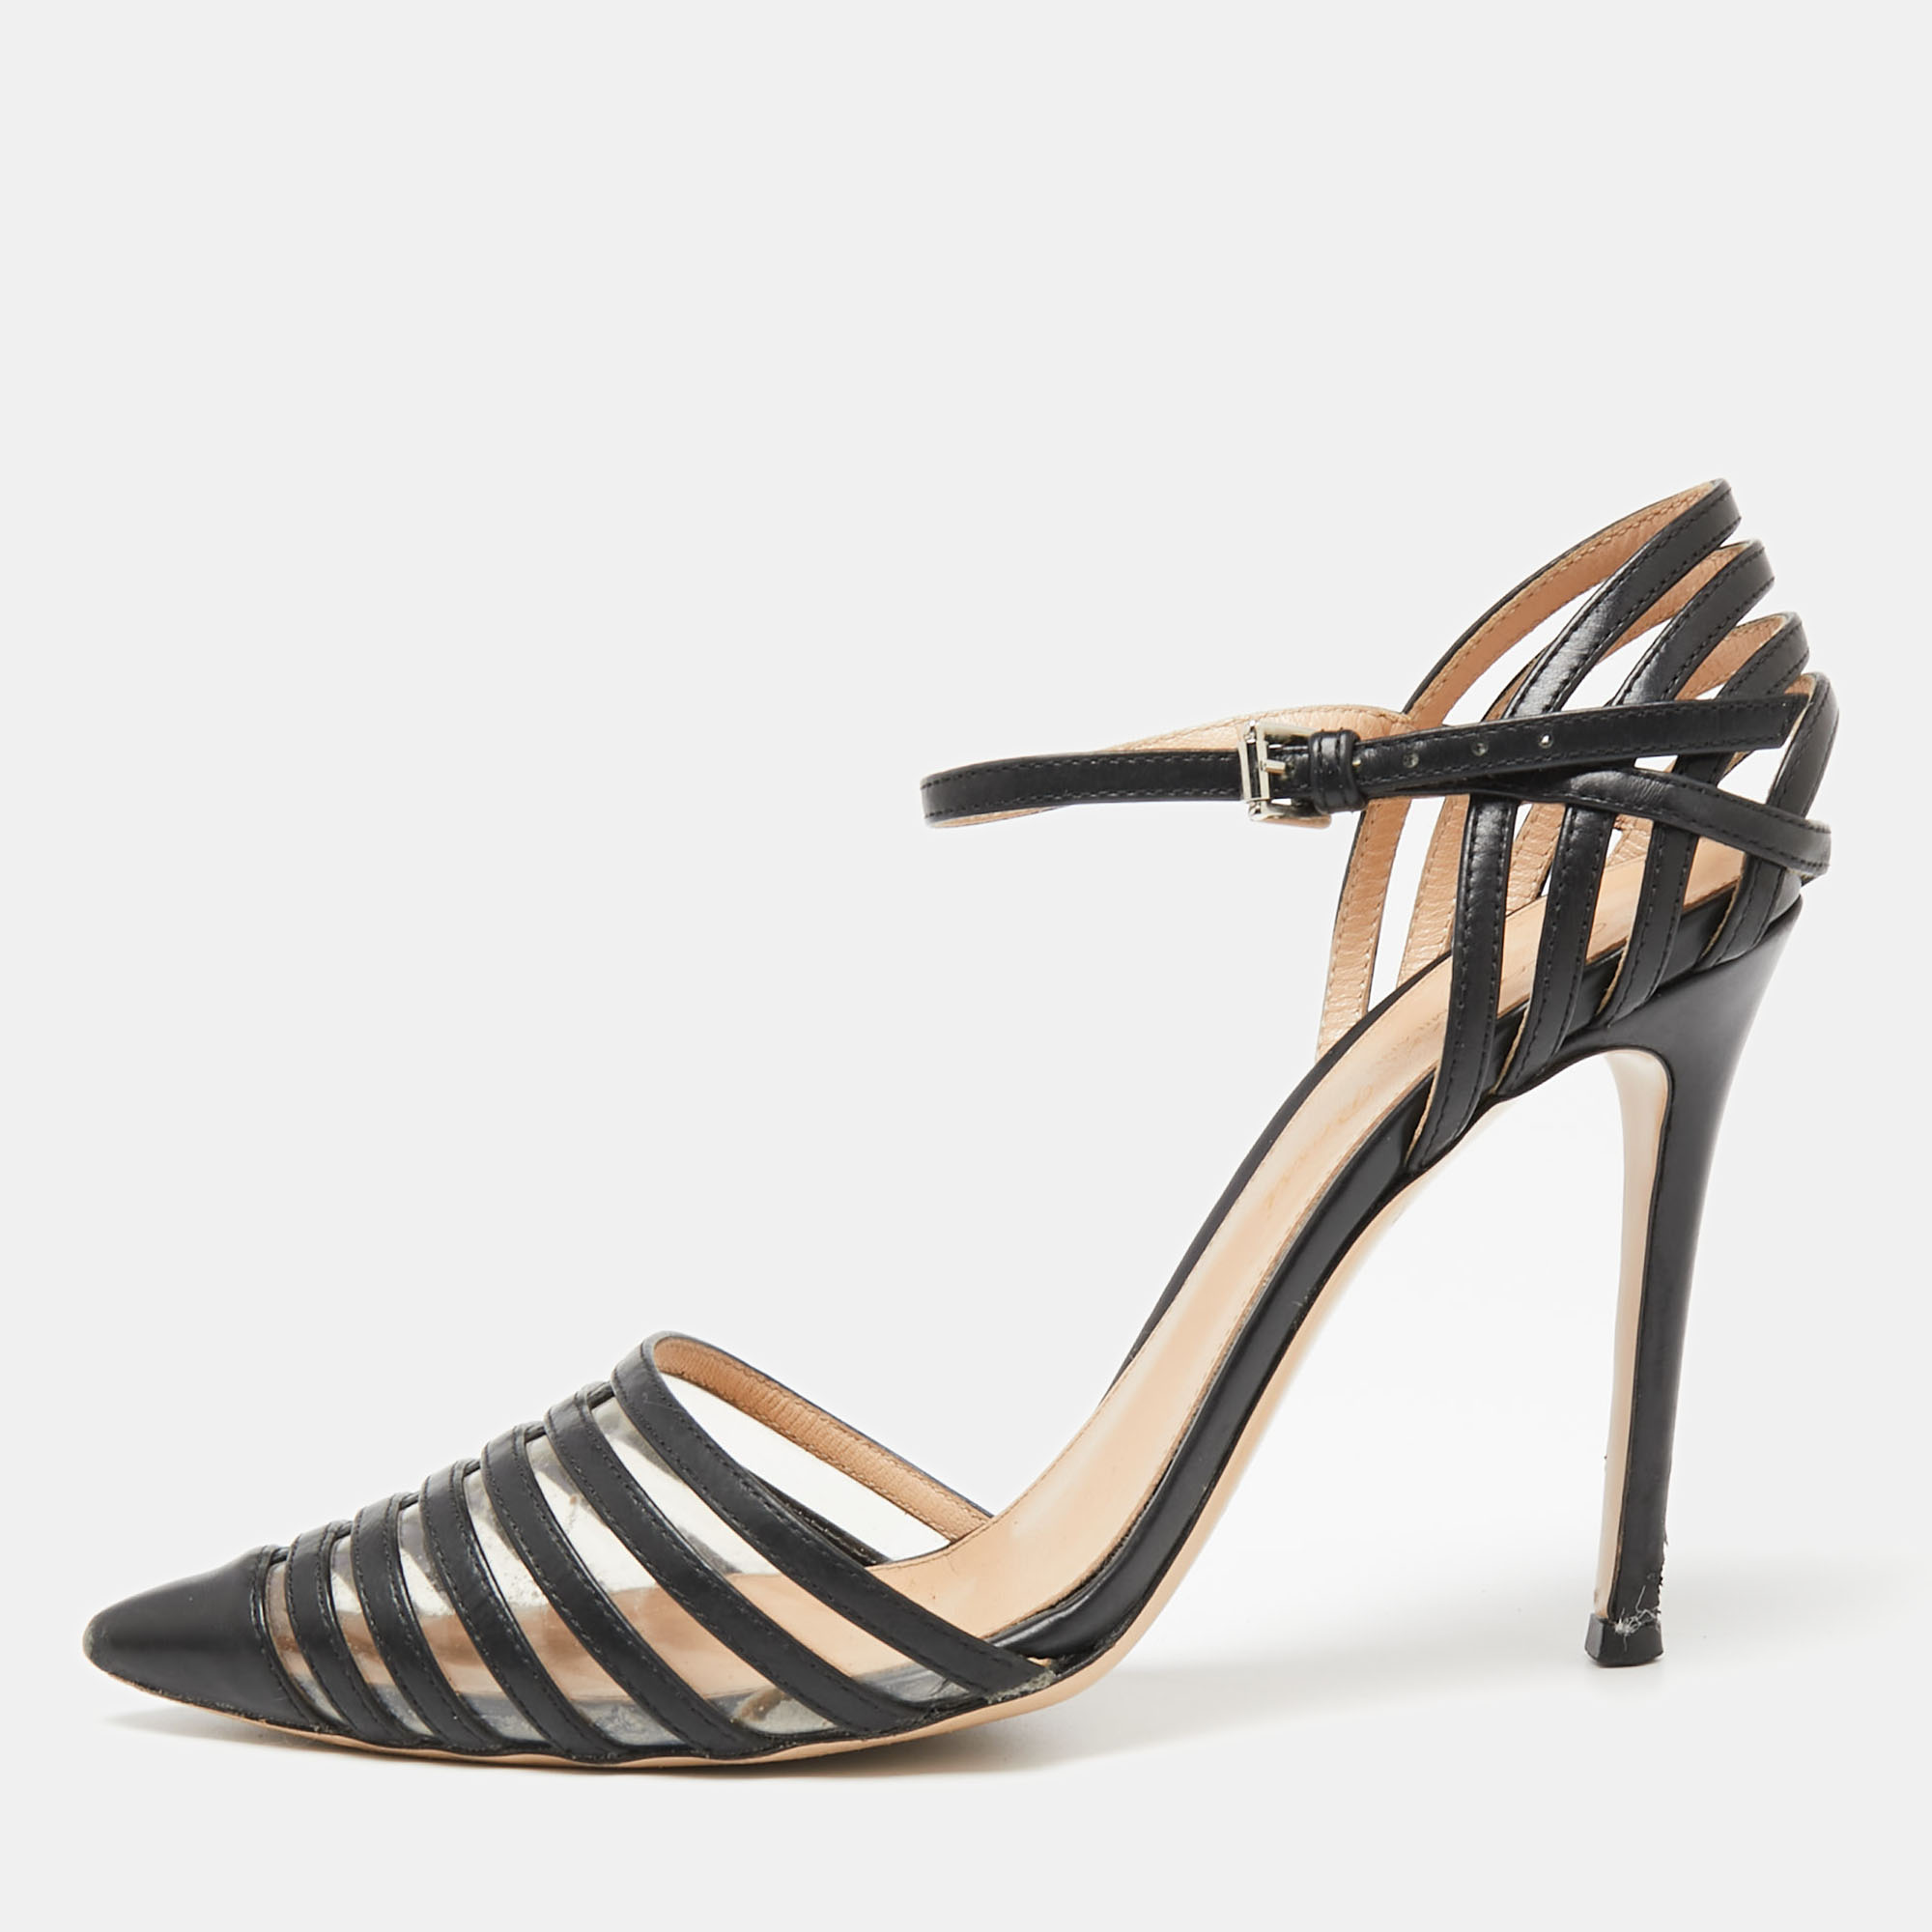 Gianvito Rossi Black Leather And PVC Caged Ankle-Strap Pointed-Toe Pumps Size 36.5